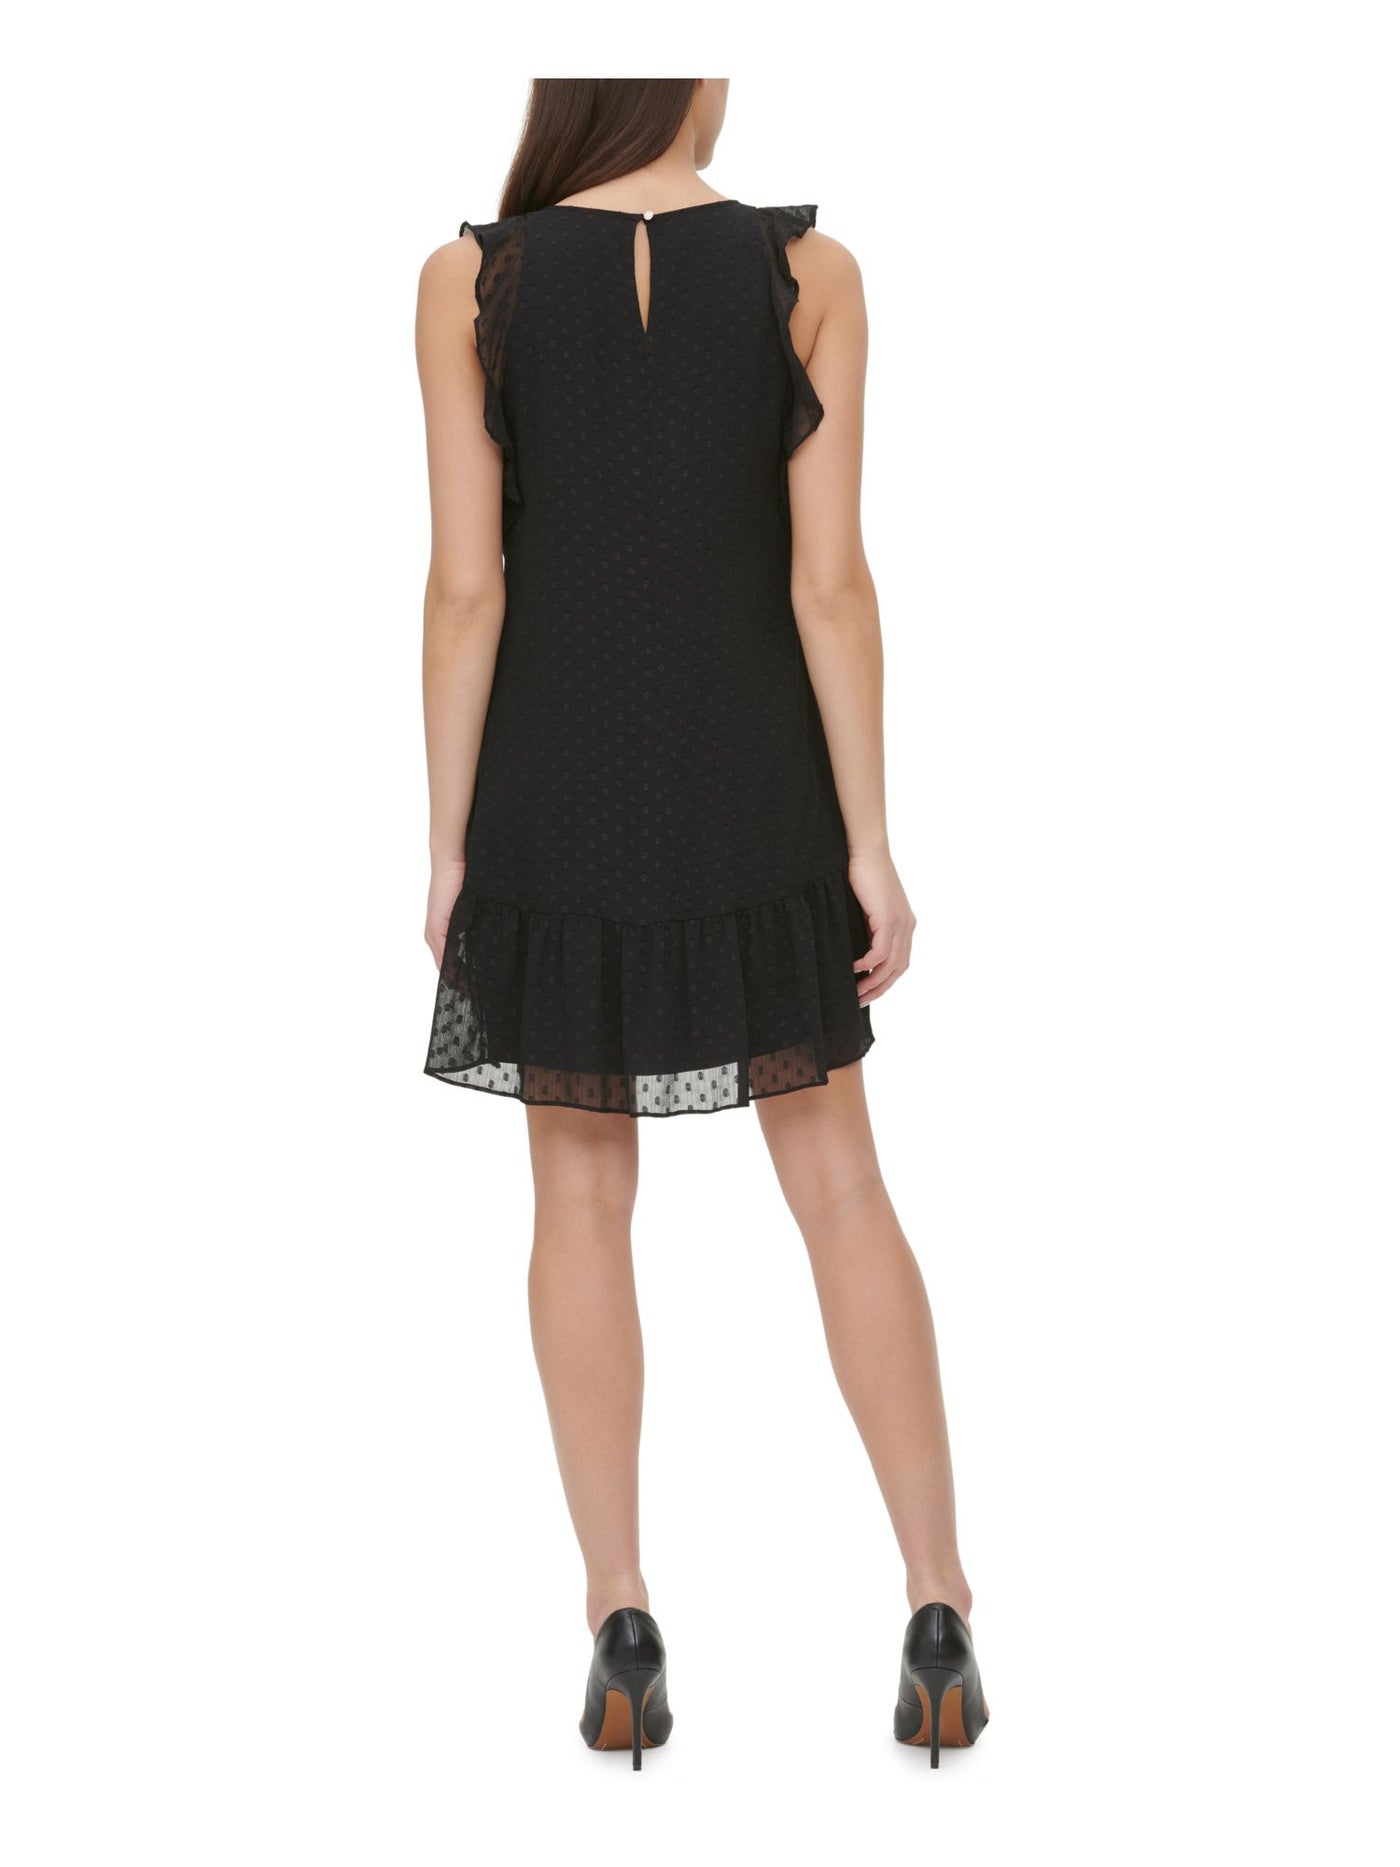 TOMMY HILFIGER Womens Black Ruched Ruffled Back Cut Out Sleeveless Round Neck Above The Knee Party Shift Dress 6